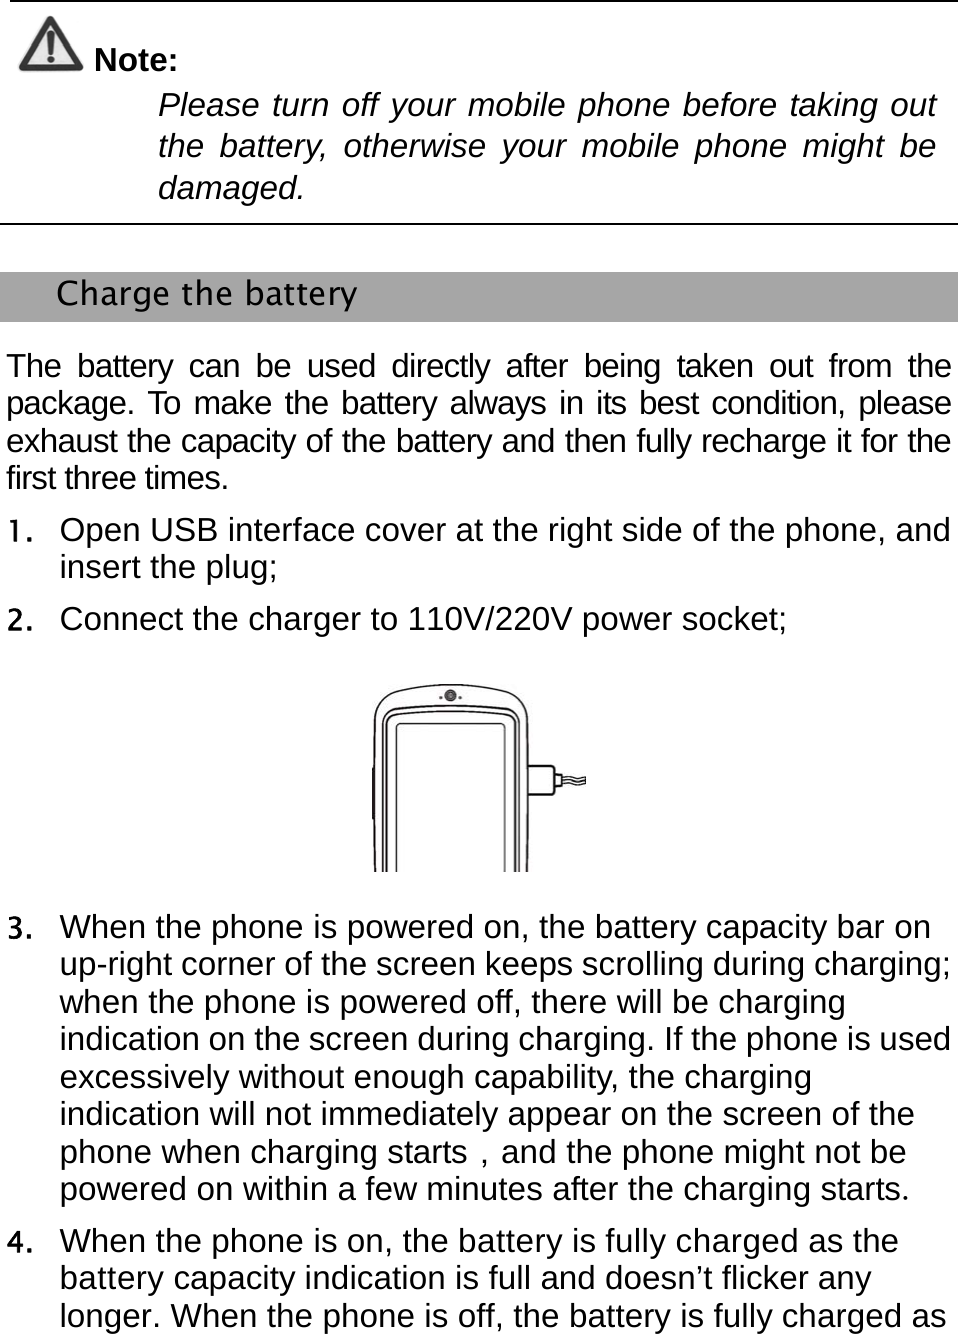    Note: Please turn off your mobile phone before taking out the battery, otherwise your mobile phone might be damaged.  Charge the battery The battery can be used directly after being taken out from the package. To make the battery always in its best condition, please exhaust the capacity of the battery and then fully recharge it for the first three times. 1. Open USB interface cover at the right side of the phone, and insert the plug; 2. Connect the charger to 110V/220V power socket;  3. When the phone is powered on, the battery capacity bar on up-right corner of the screen keeps scrolling during charging; when the phone is powered off, there will be charging indication on the screen during charging. If the phone is used excessively without enough capability, the charging indication will not immediately appear on the screen of the phone when charging starts，and the phone might not be powered on within a few minutes after the charging starts. 4. When the phone is on, the battery is fully charged as the battery capacity indication is full and doesn’t flicker any longer. When the phone is off, the battery is fully charged as 